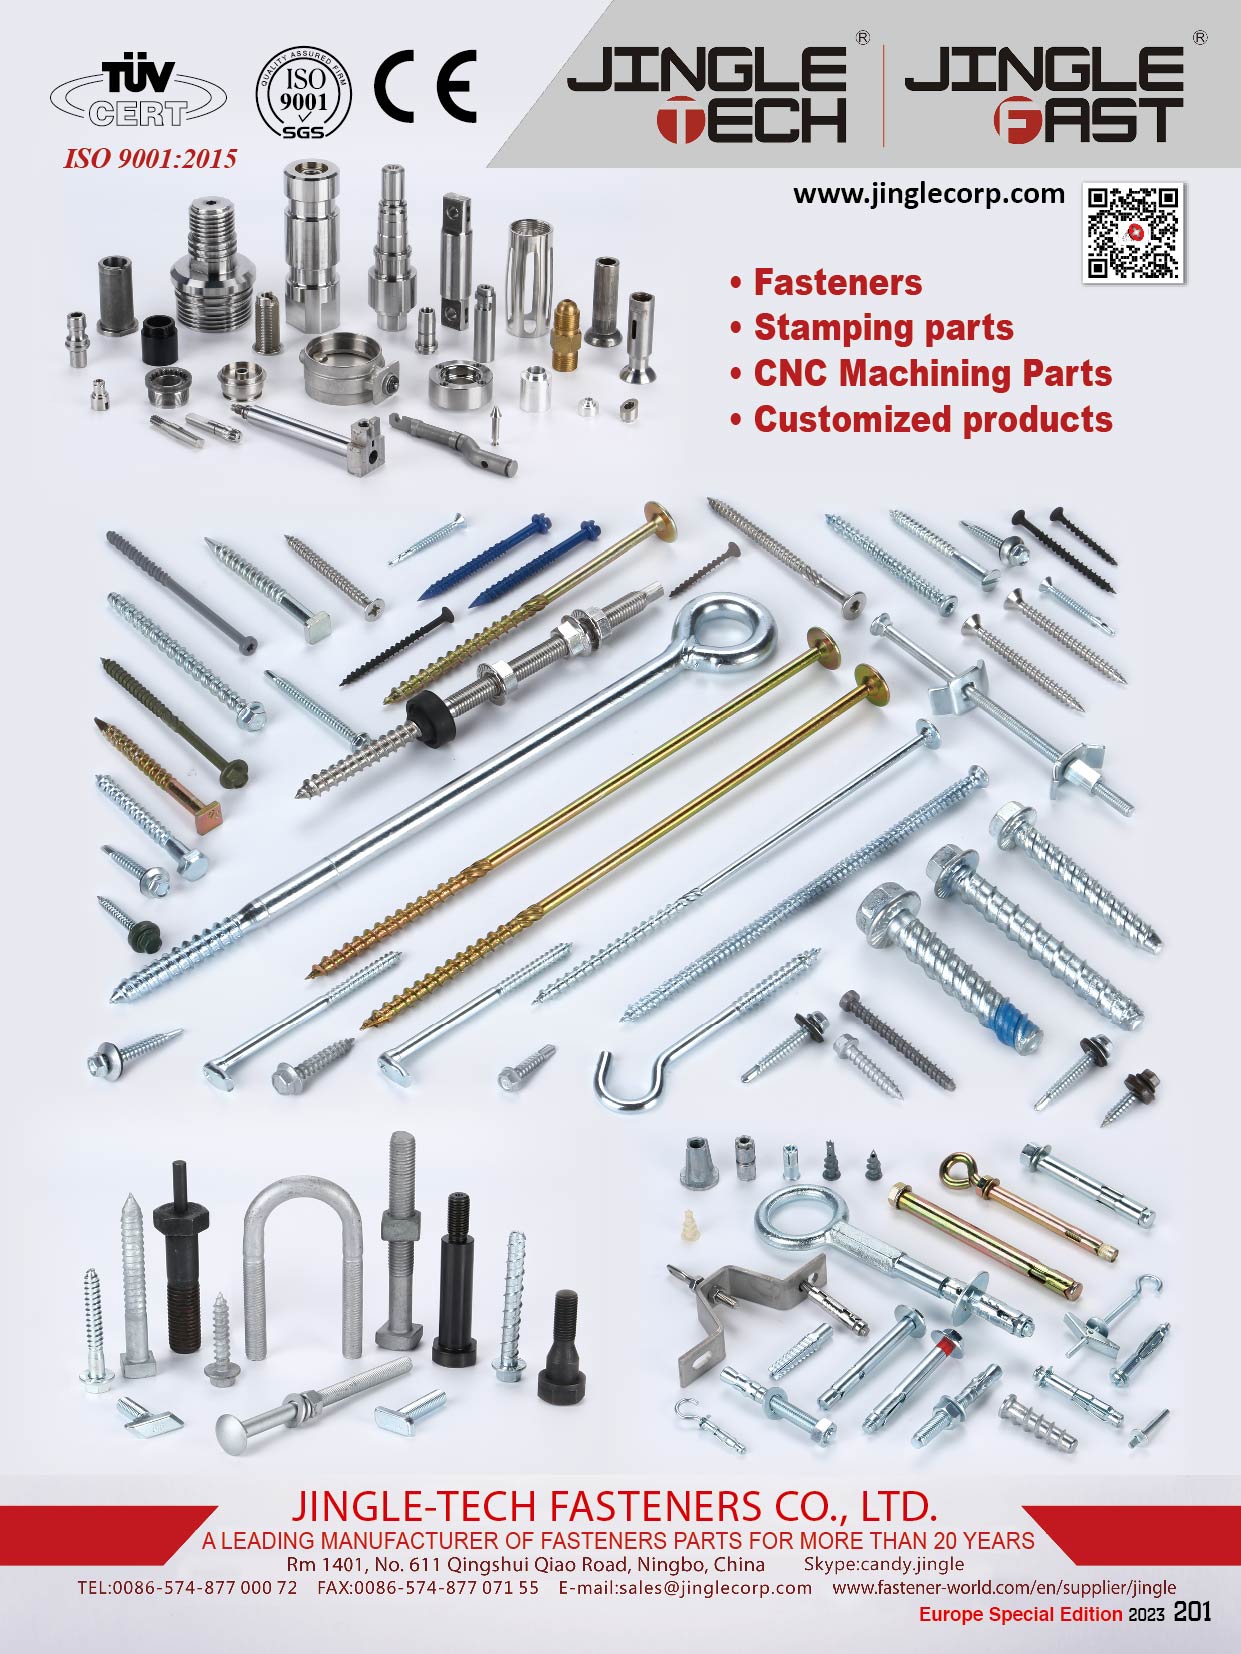 JINGLE-TECH FASTENERS CO., LTD. , Fasteners, Stamping Parts, CNC Machining Parts, Customized Products , Non-standard Hexagon Head Screws / Bolts